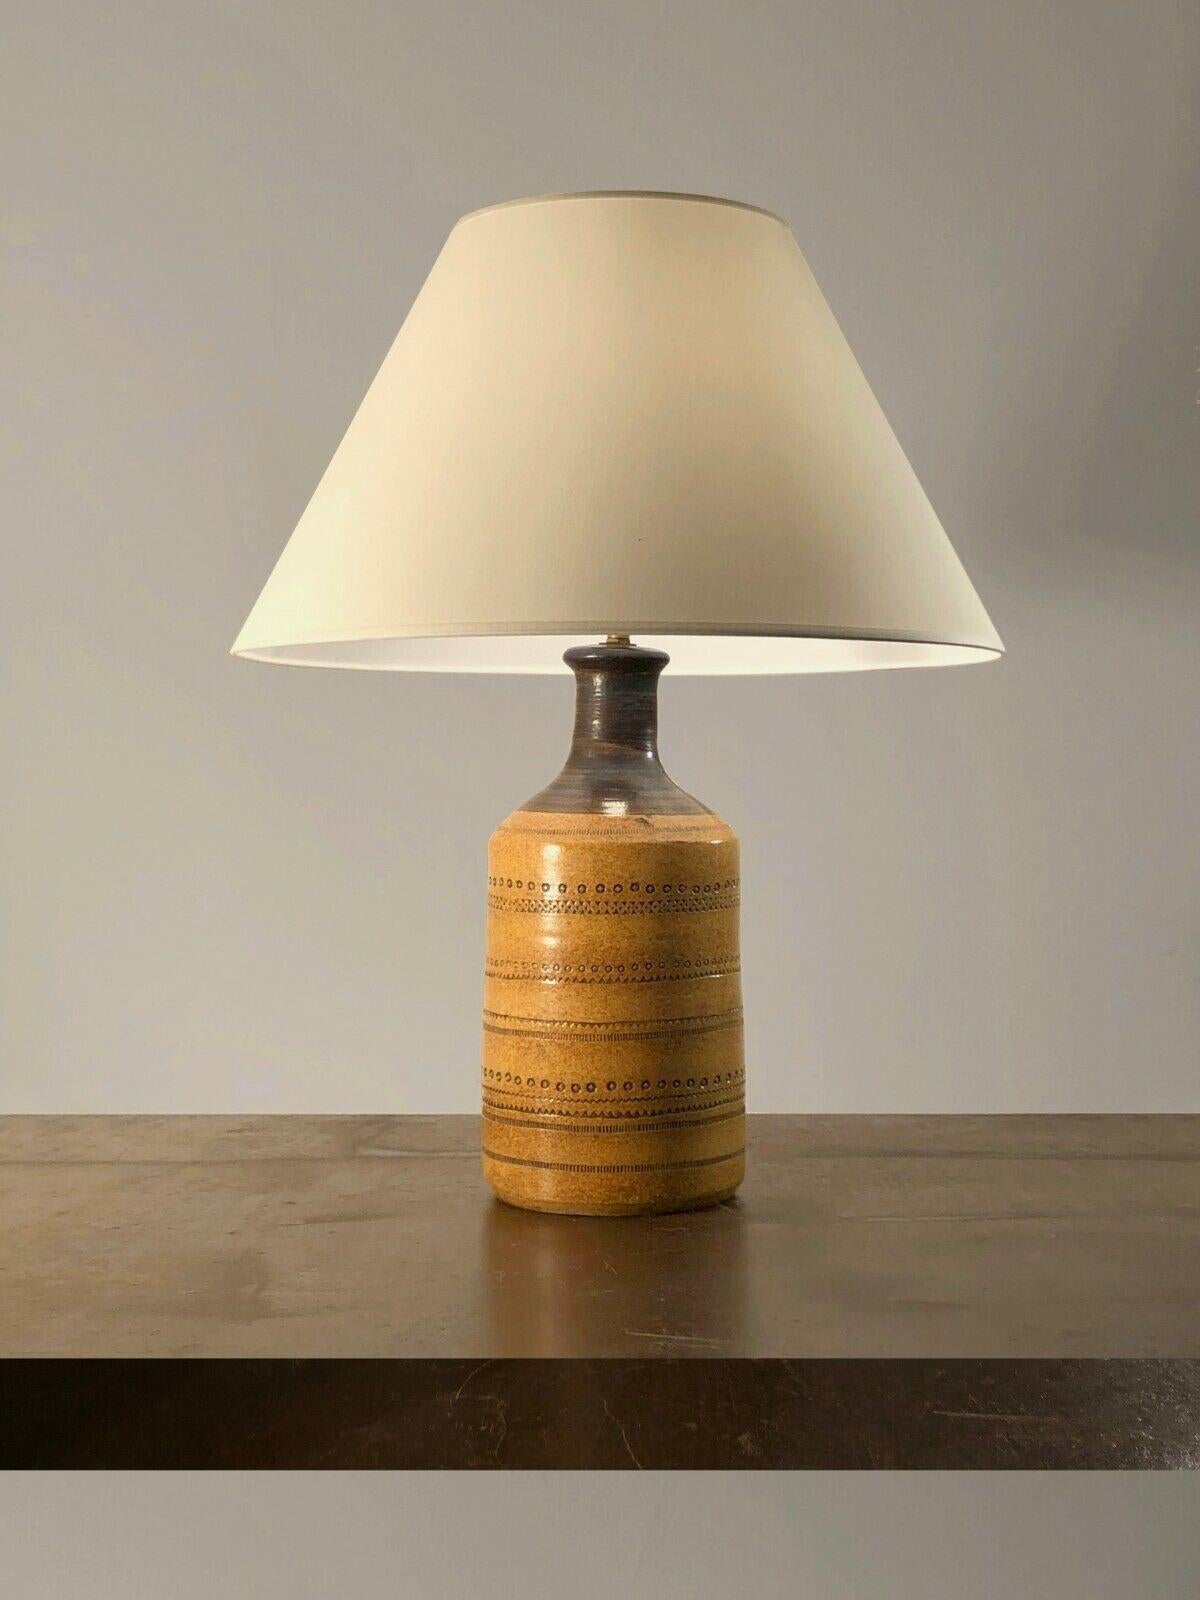 An imposing table or floor lamp with scarified decorations, Modernist, Free Form, Popular Art, Shabby-Chic, large and solid thick glowing brown enameled ceramic base, and its beautiful off-white conical lampshade, in the style of Georges Pelletier